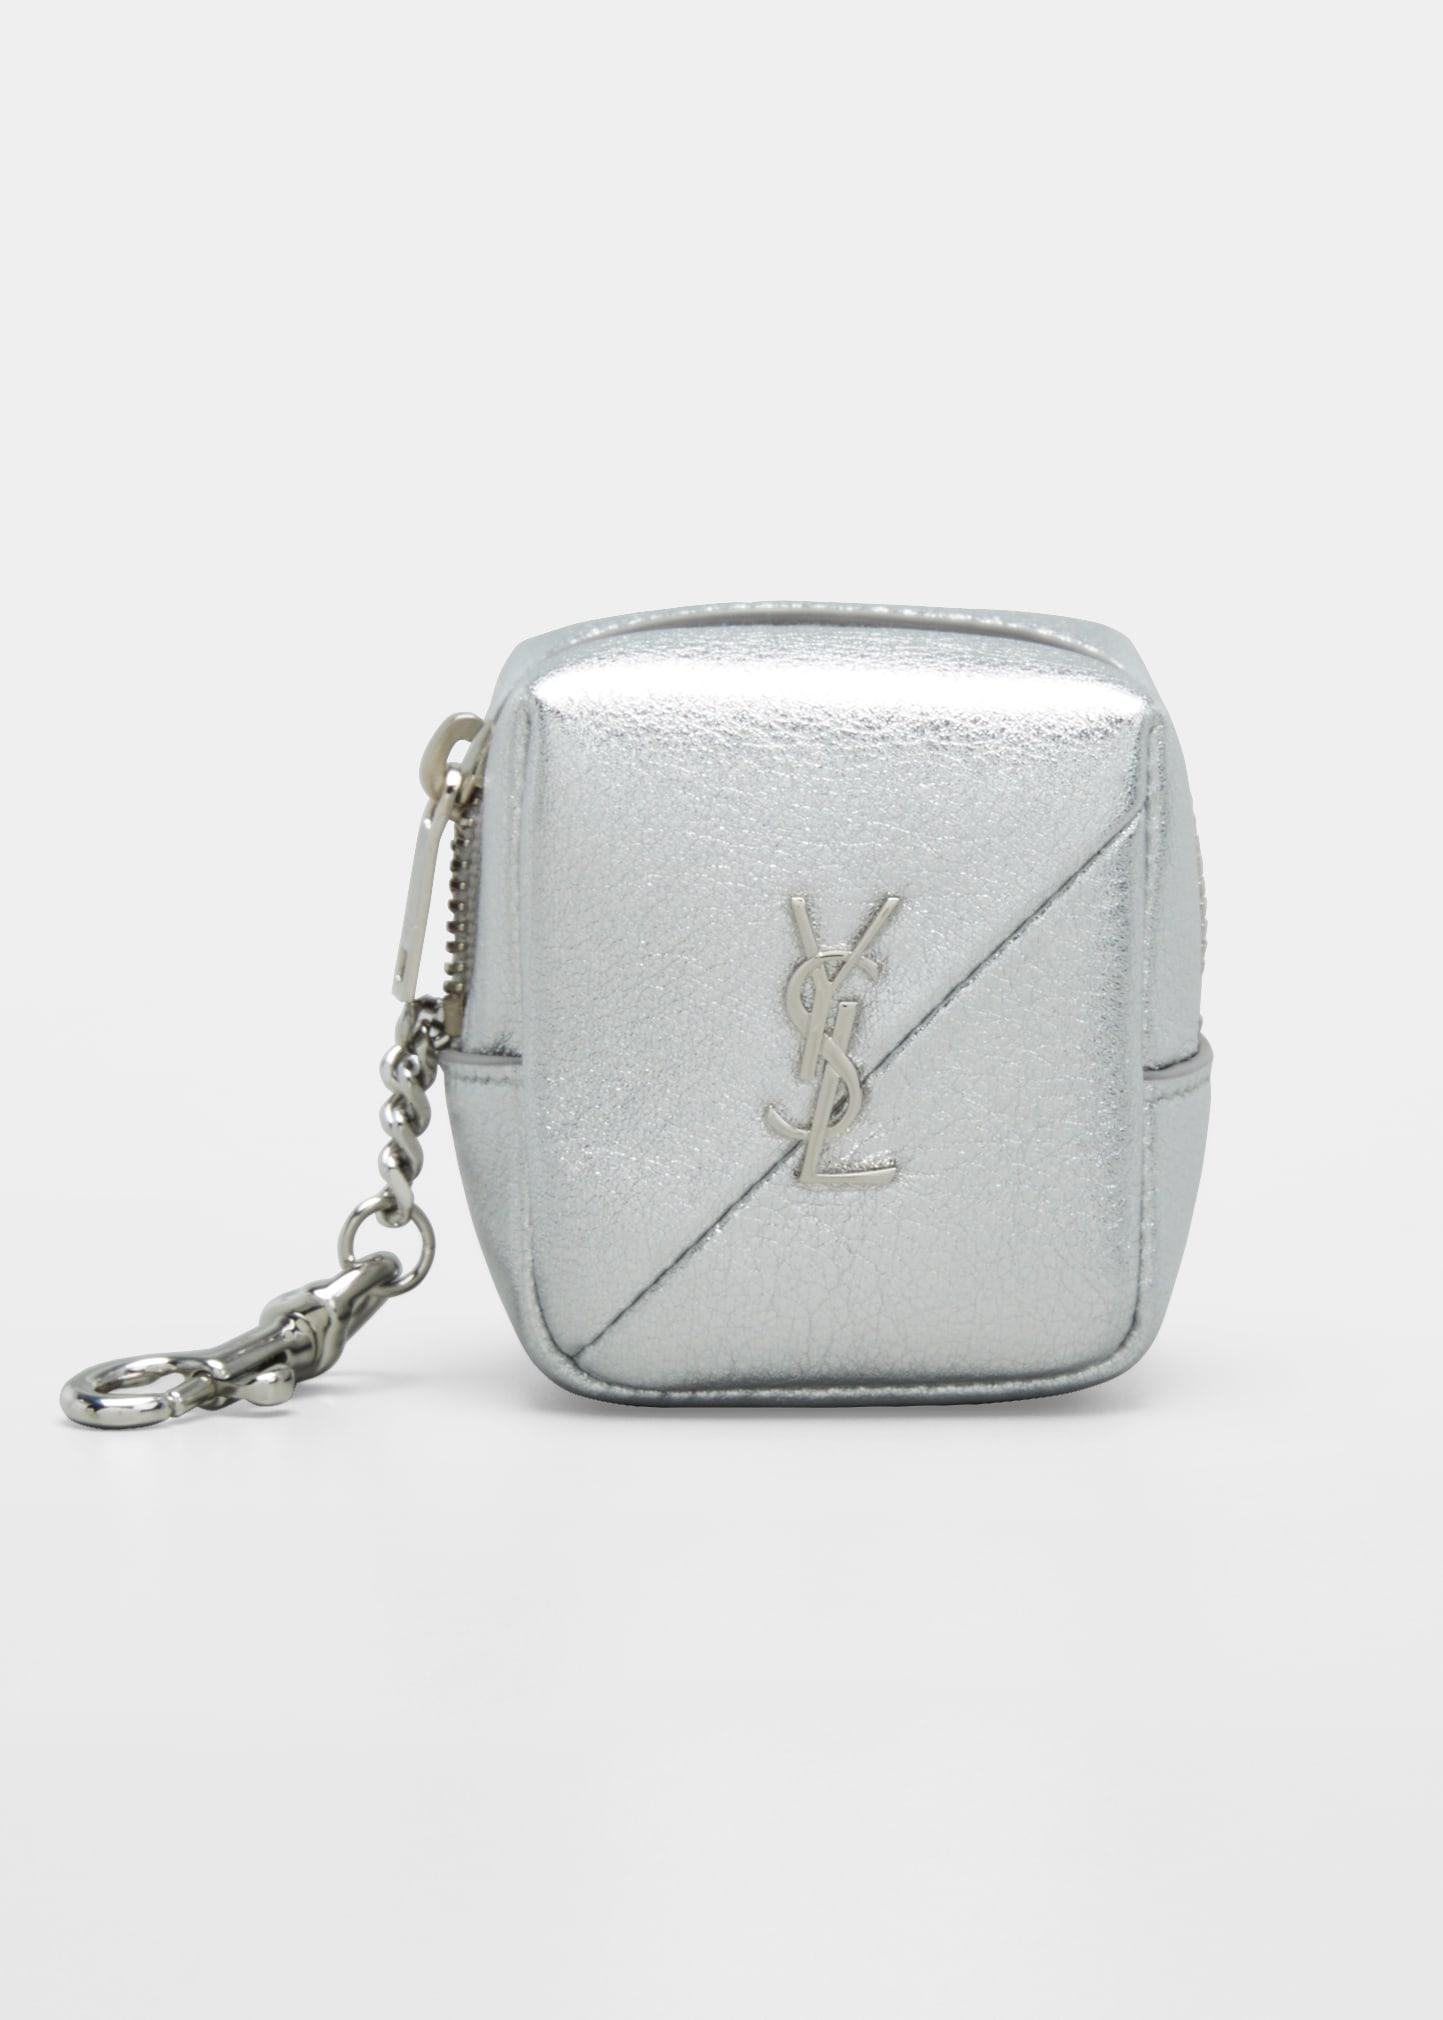 Saint Laurent Jamie Ysl Leather Square Pouch Key Chain Charm in Gray